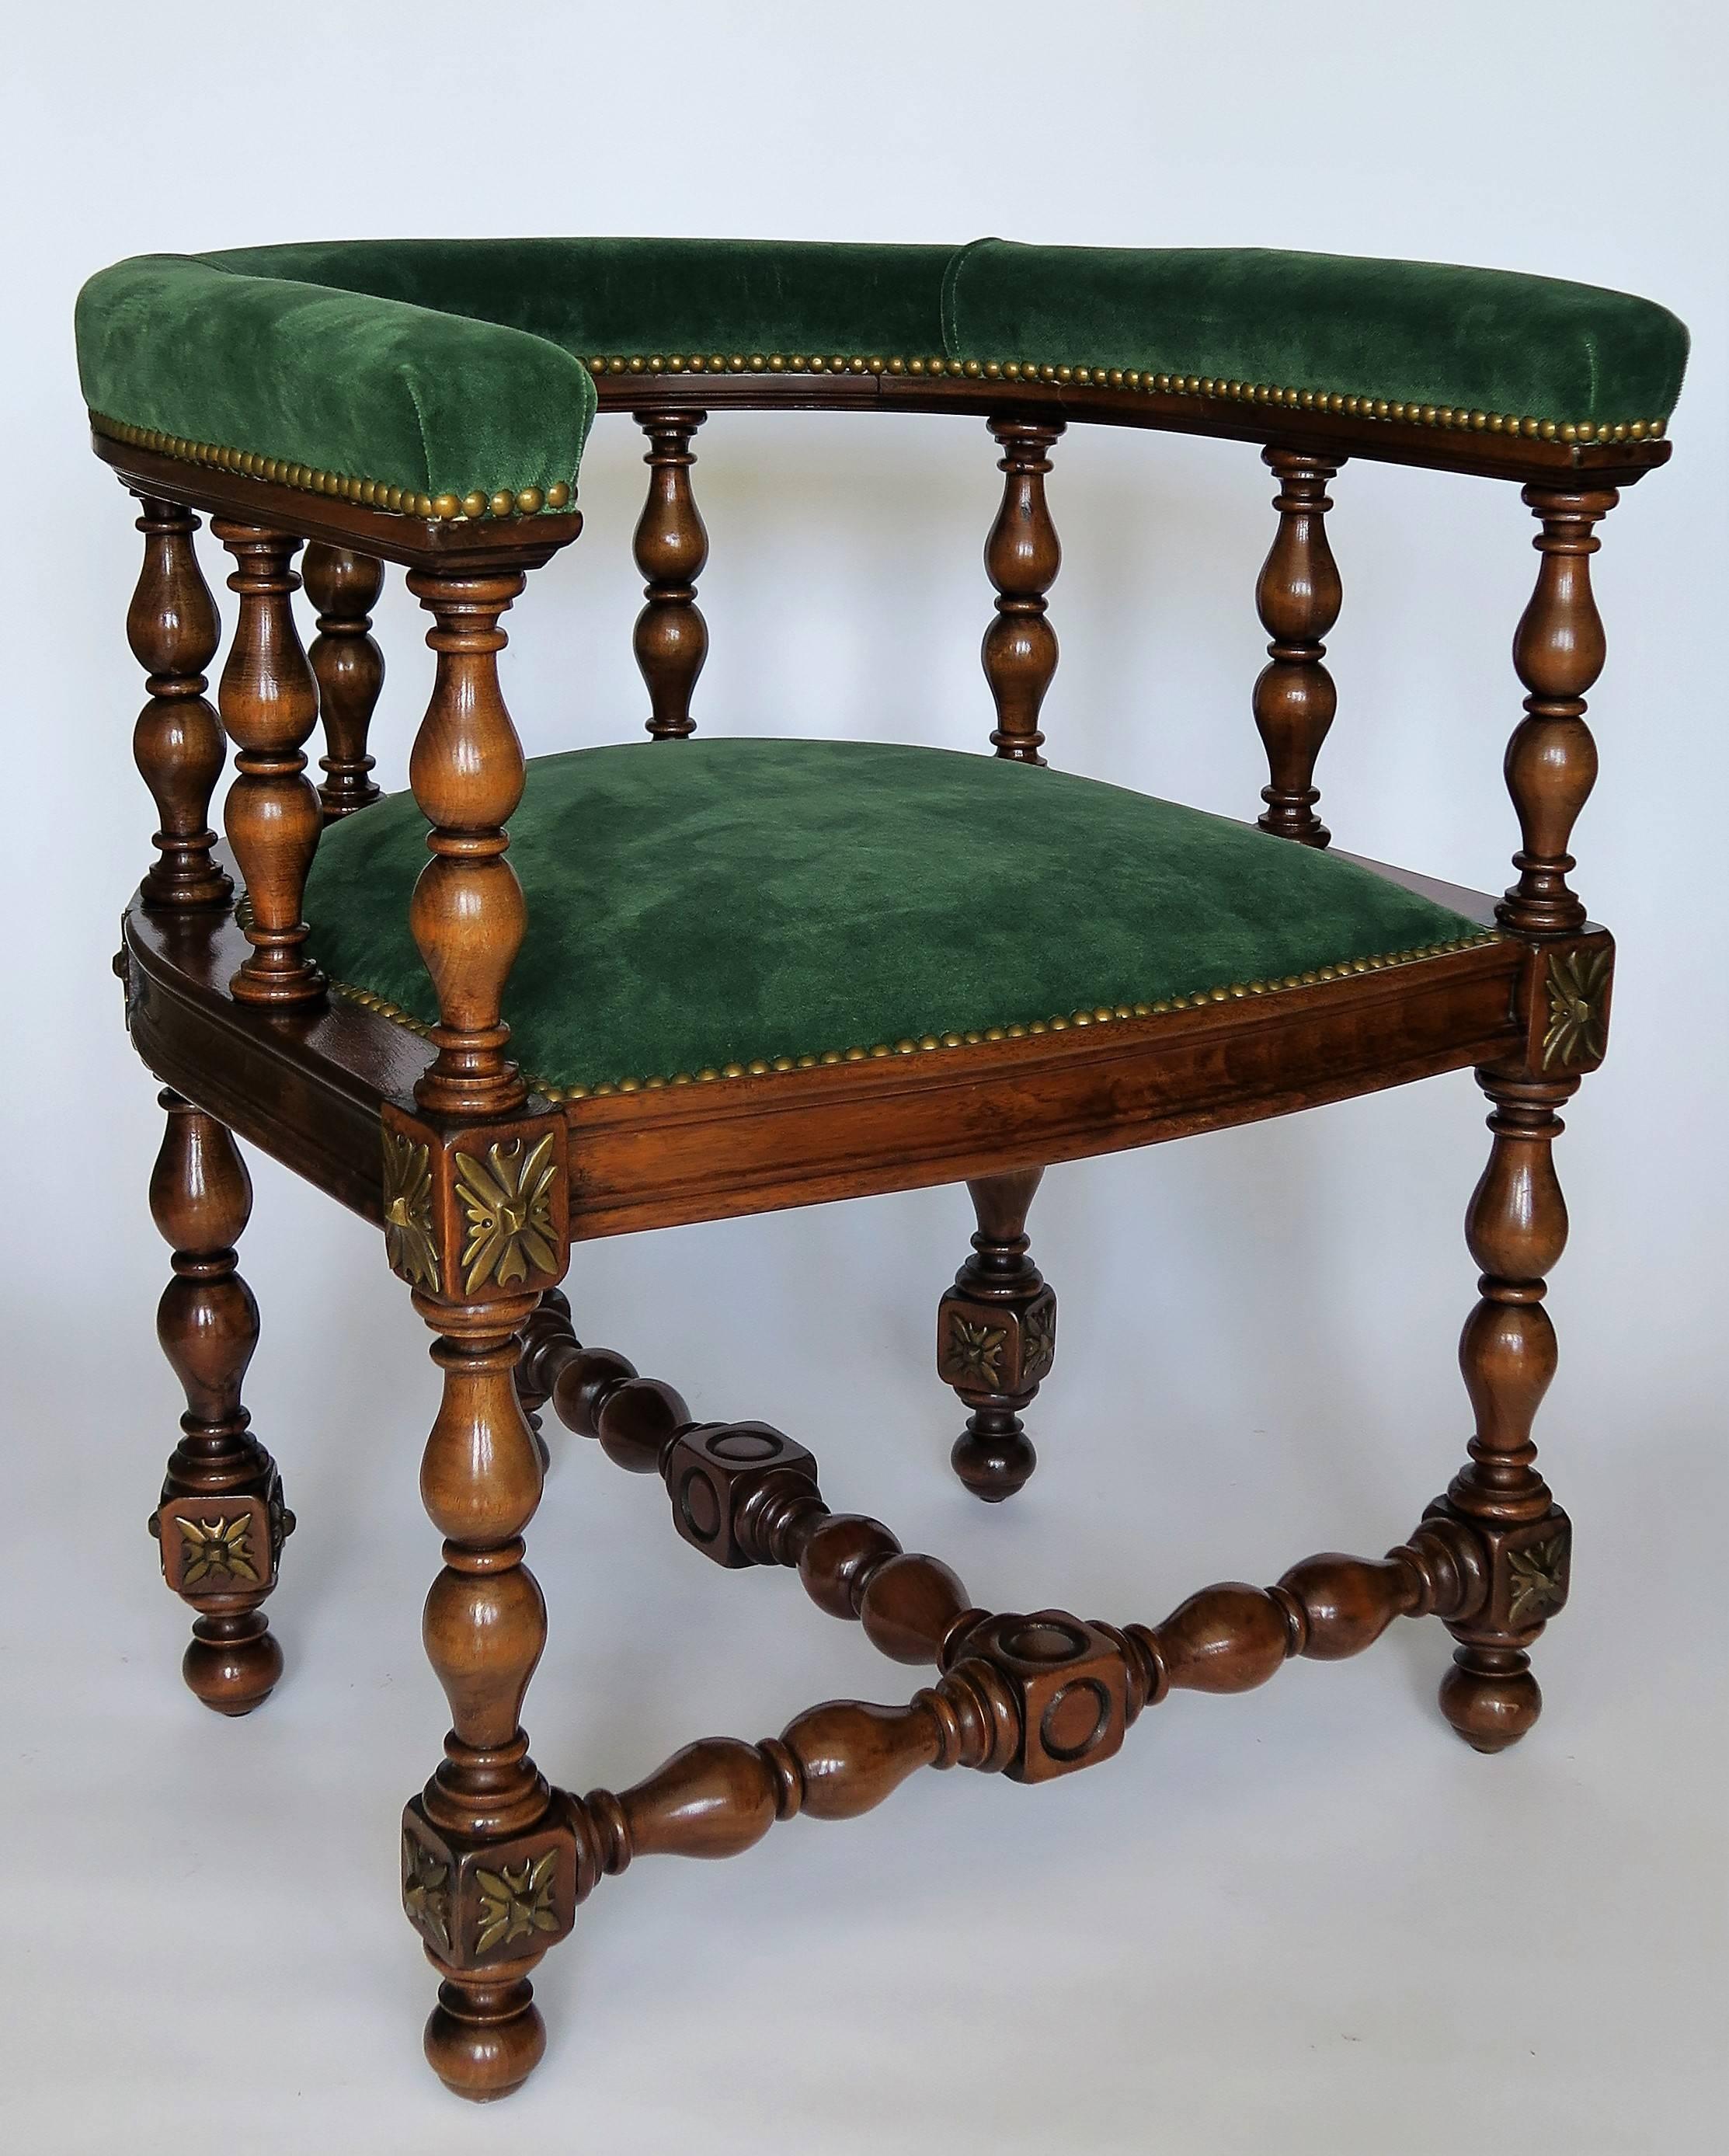 English Pair of Barrel Back Jacobean Style Library Chairs with Emerald Green Velvet